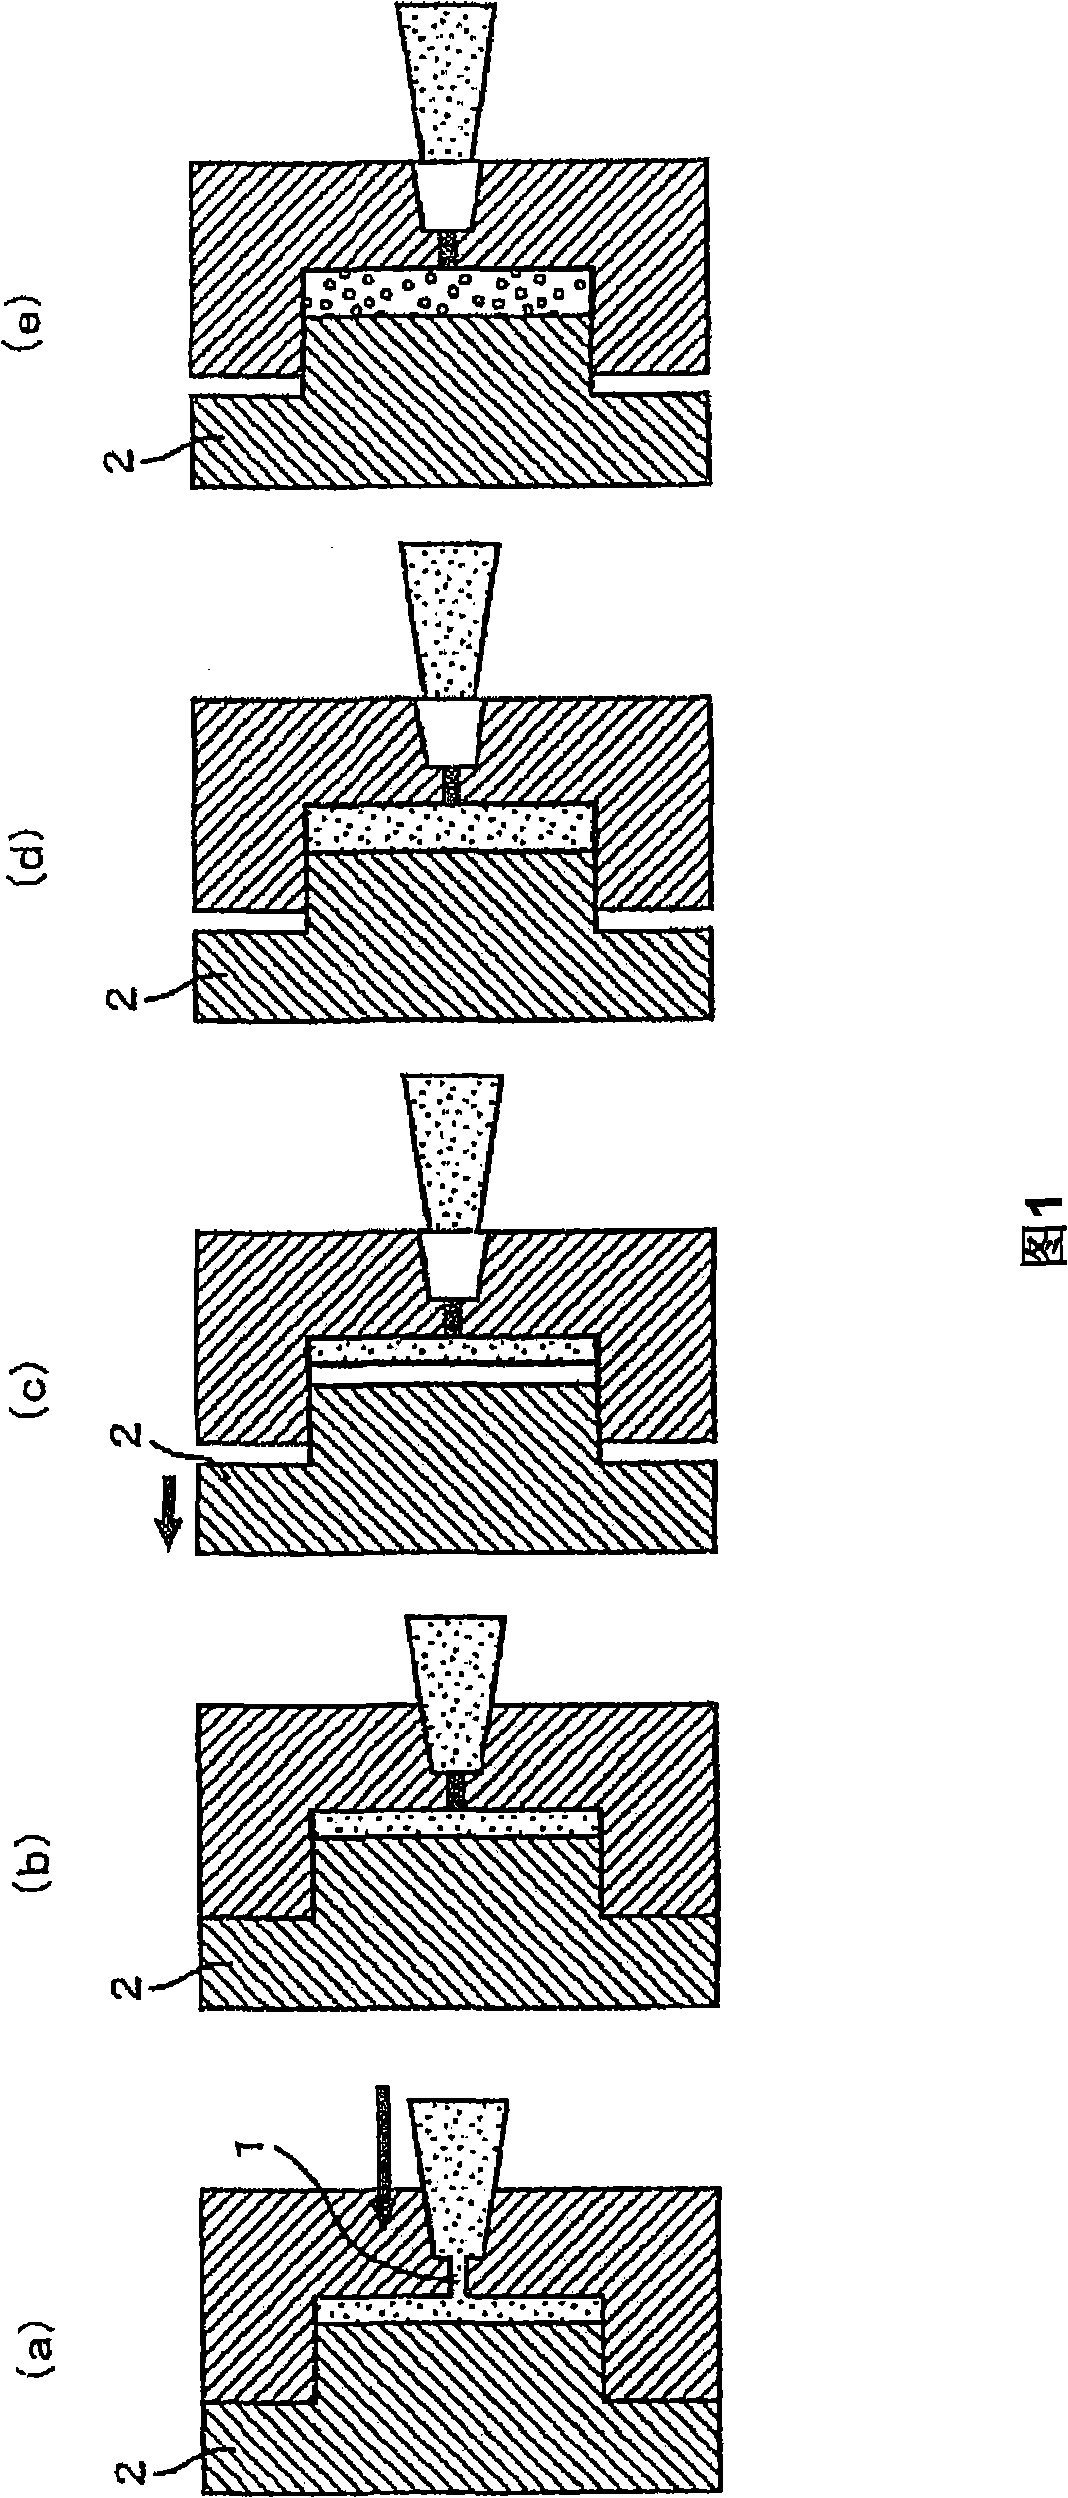 Molded foam article and method of producing molded foam article